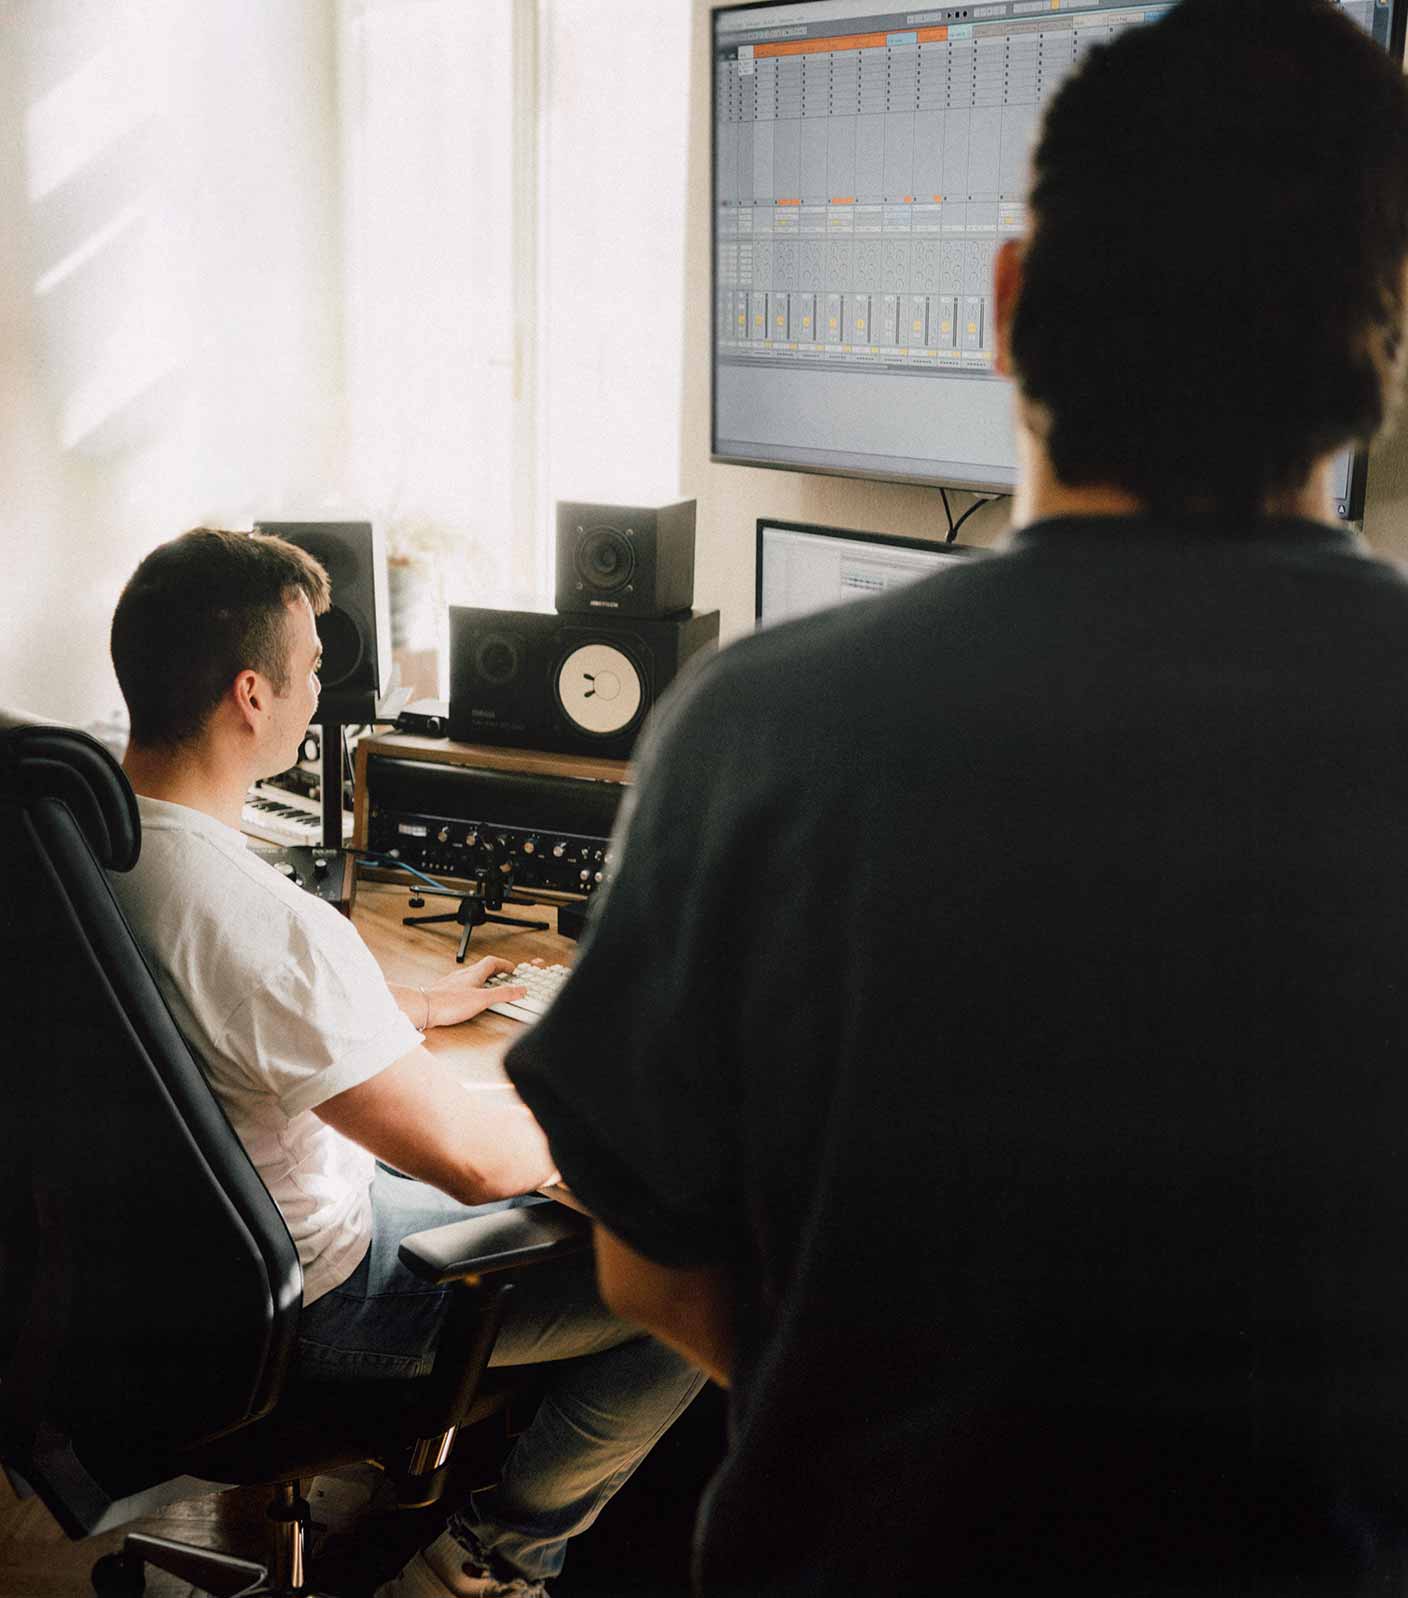 Two sound designers and music producers from unstudios in their studio working on a sound design project. Photo shot on Fujifilm X100V by Christian Leban.